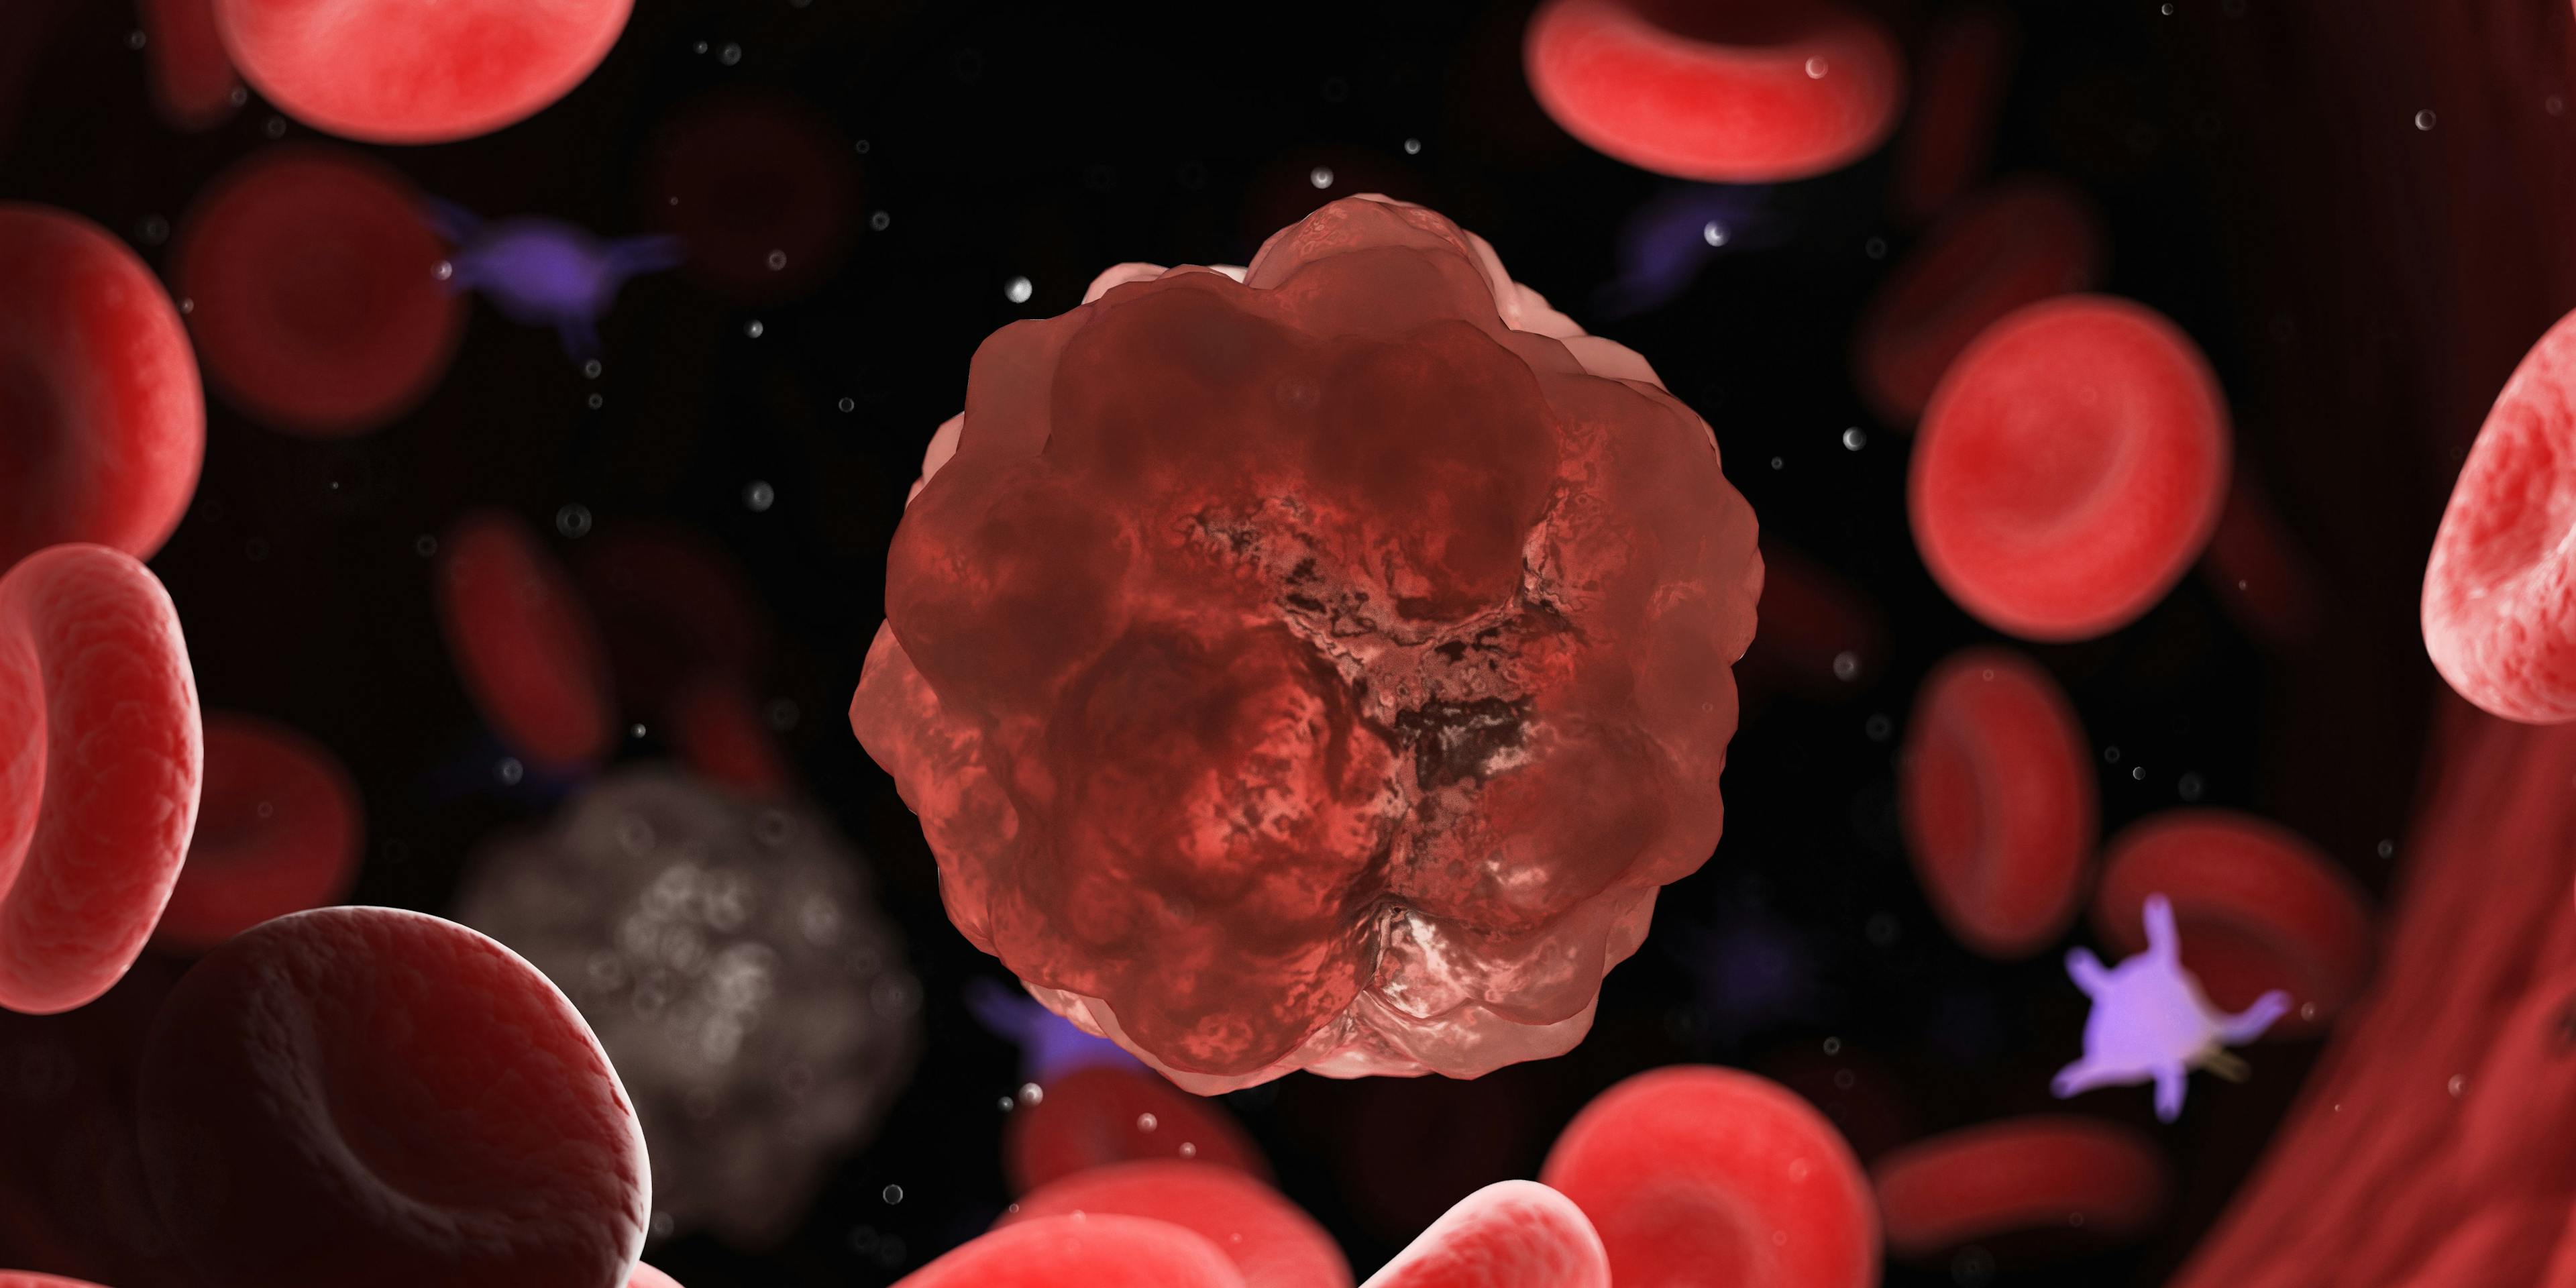 3d rendered medically accurate illustration of a cancer cell: © sciepro - stock.adobe.com